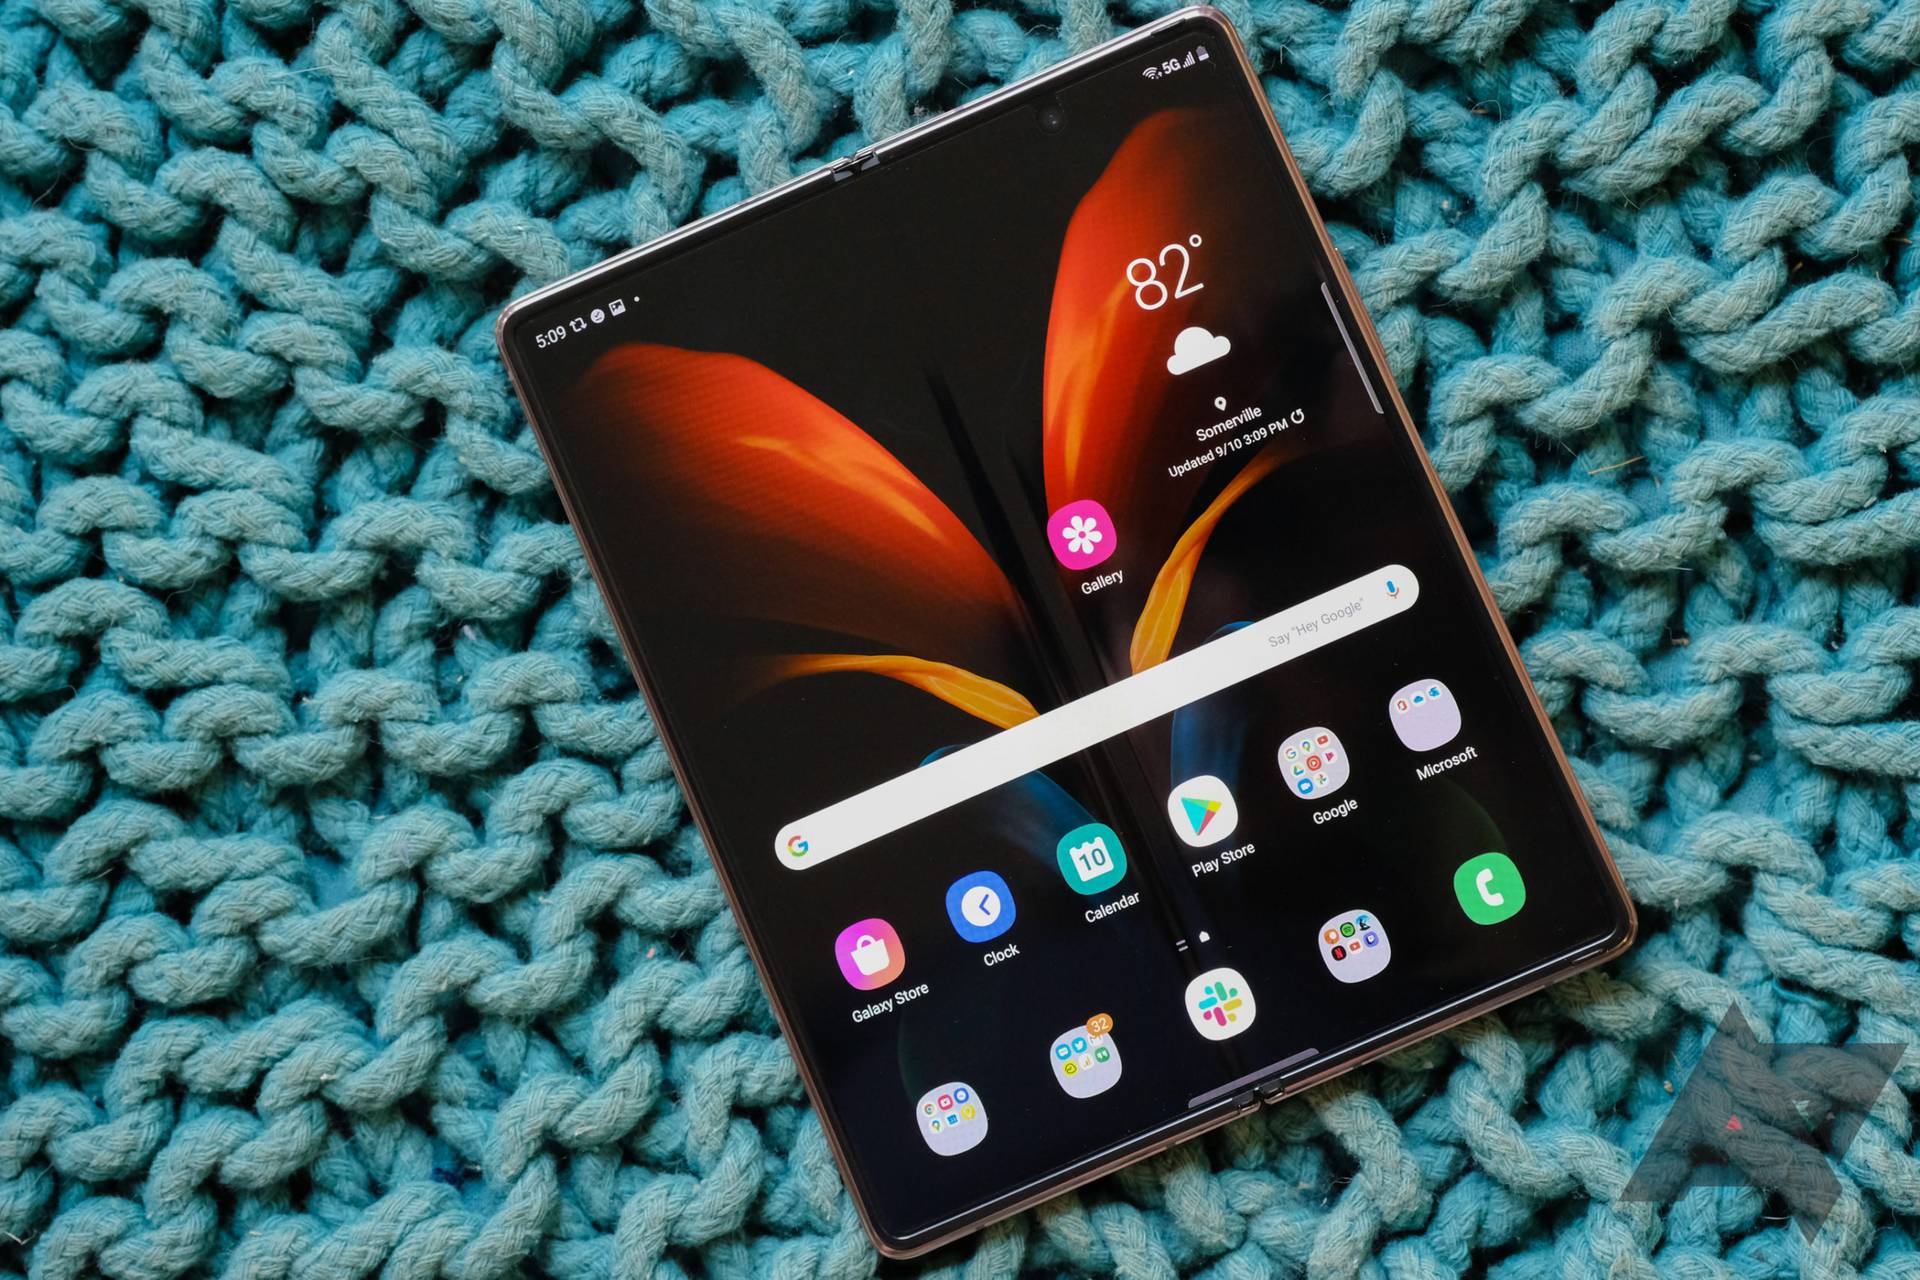 Samsung believes foldable phones will outgrow the Galaxy S series in the next three years